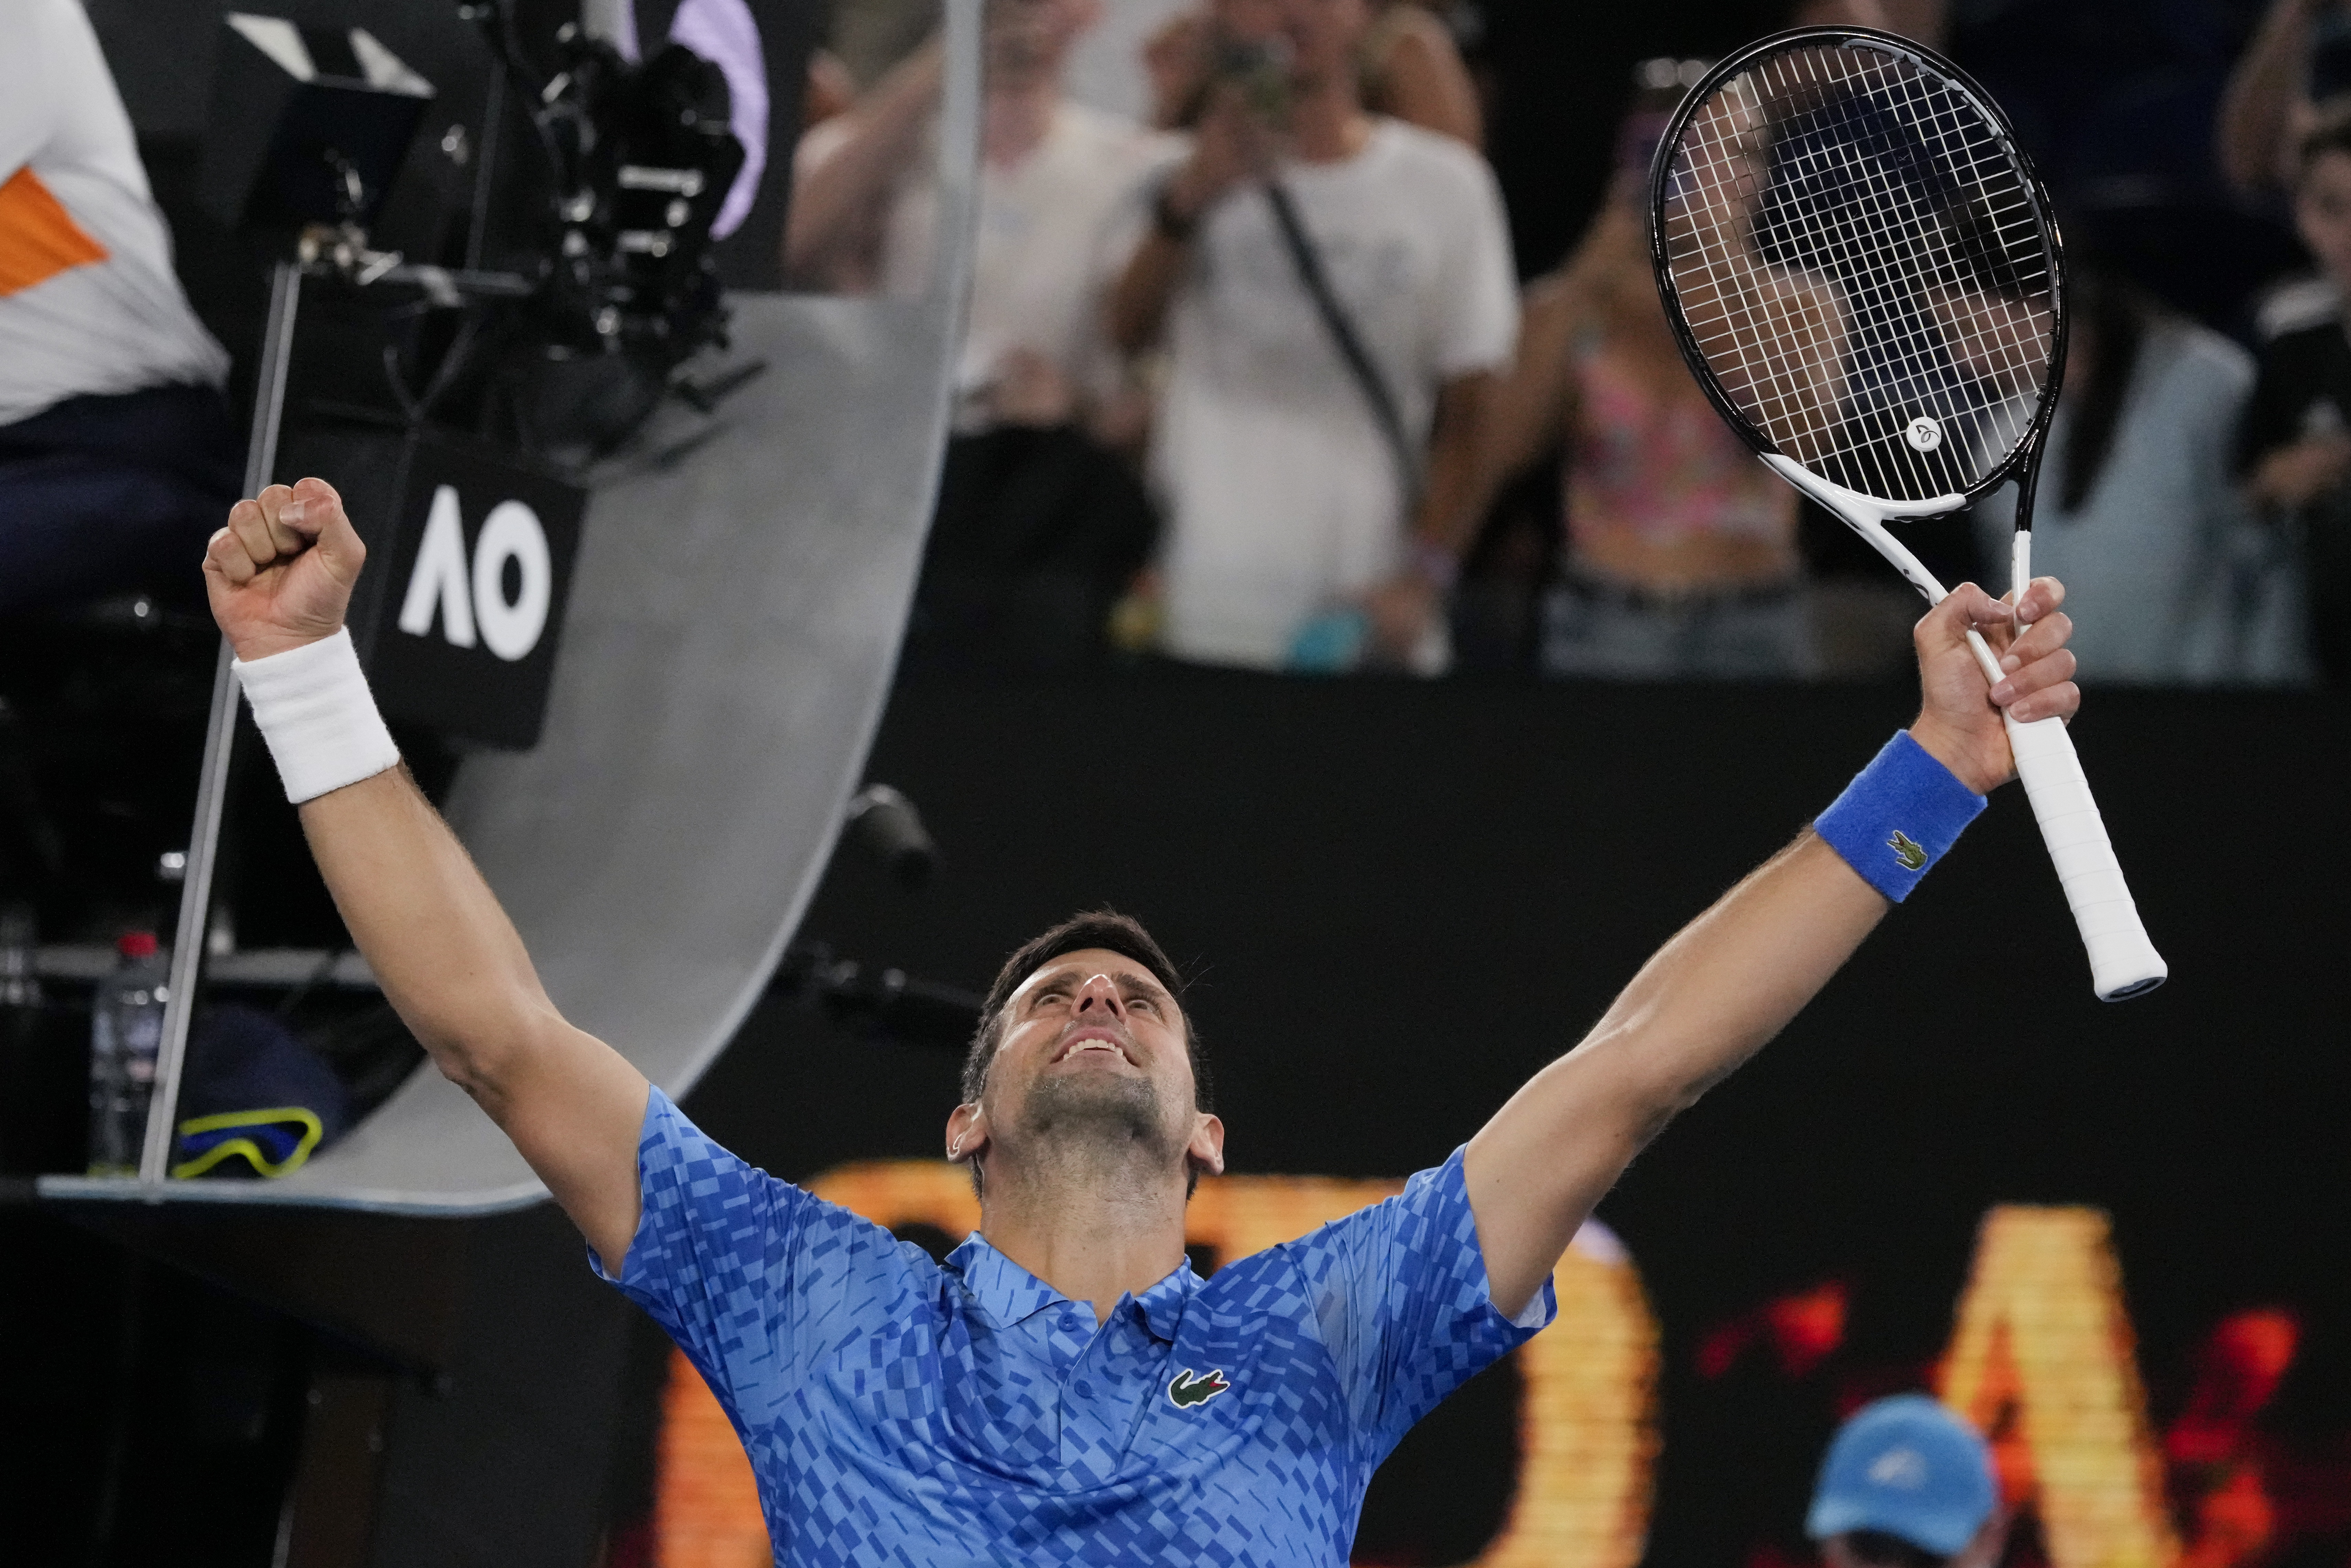 Novak Djokovic waves after beating Roberto Carballés Baena in the first round of the Australian Open, Wednesday, January 18, 2023, in Melbourne.  (AP Photo/Aaron Favila)